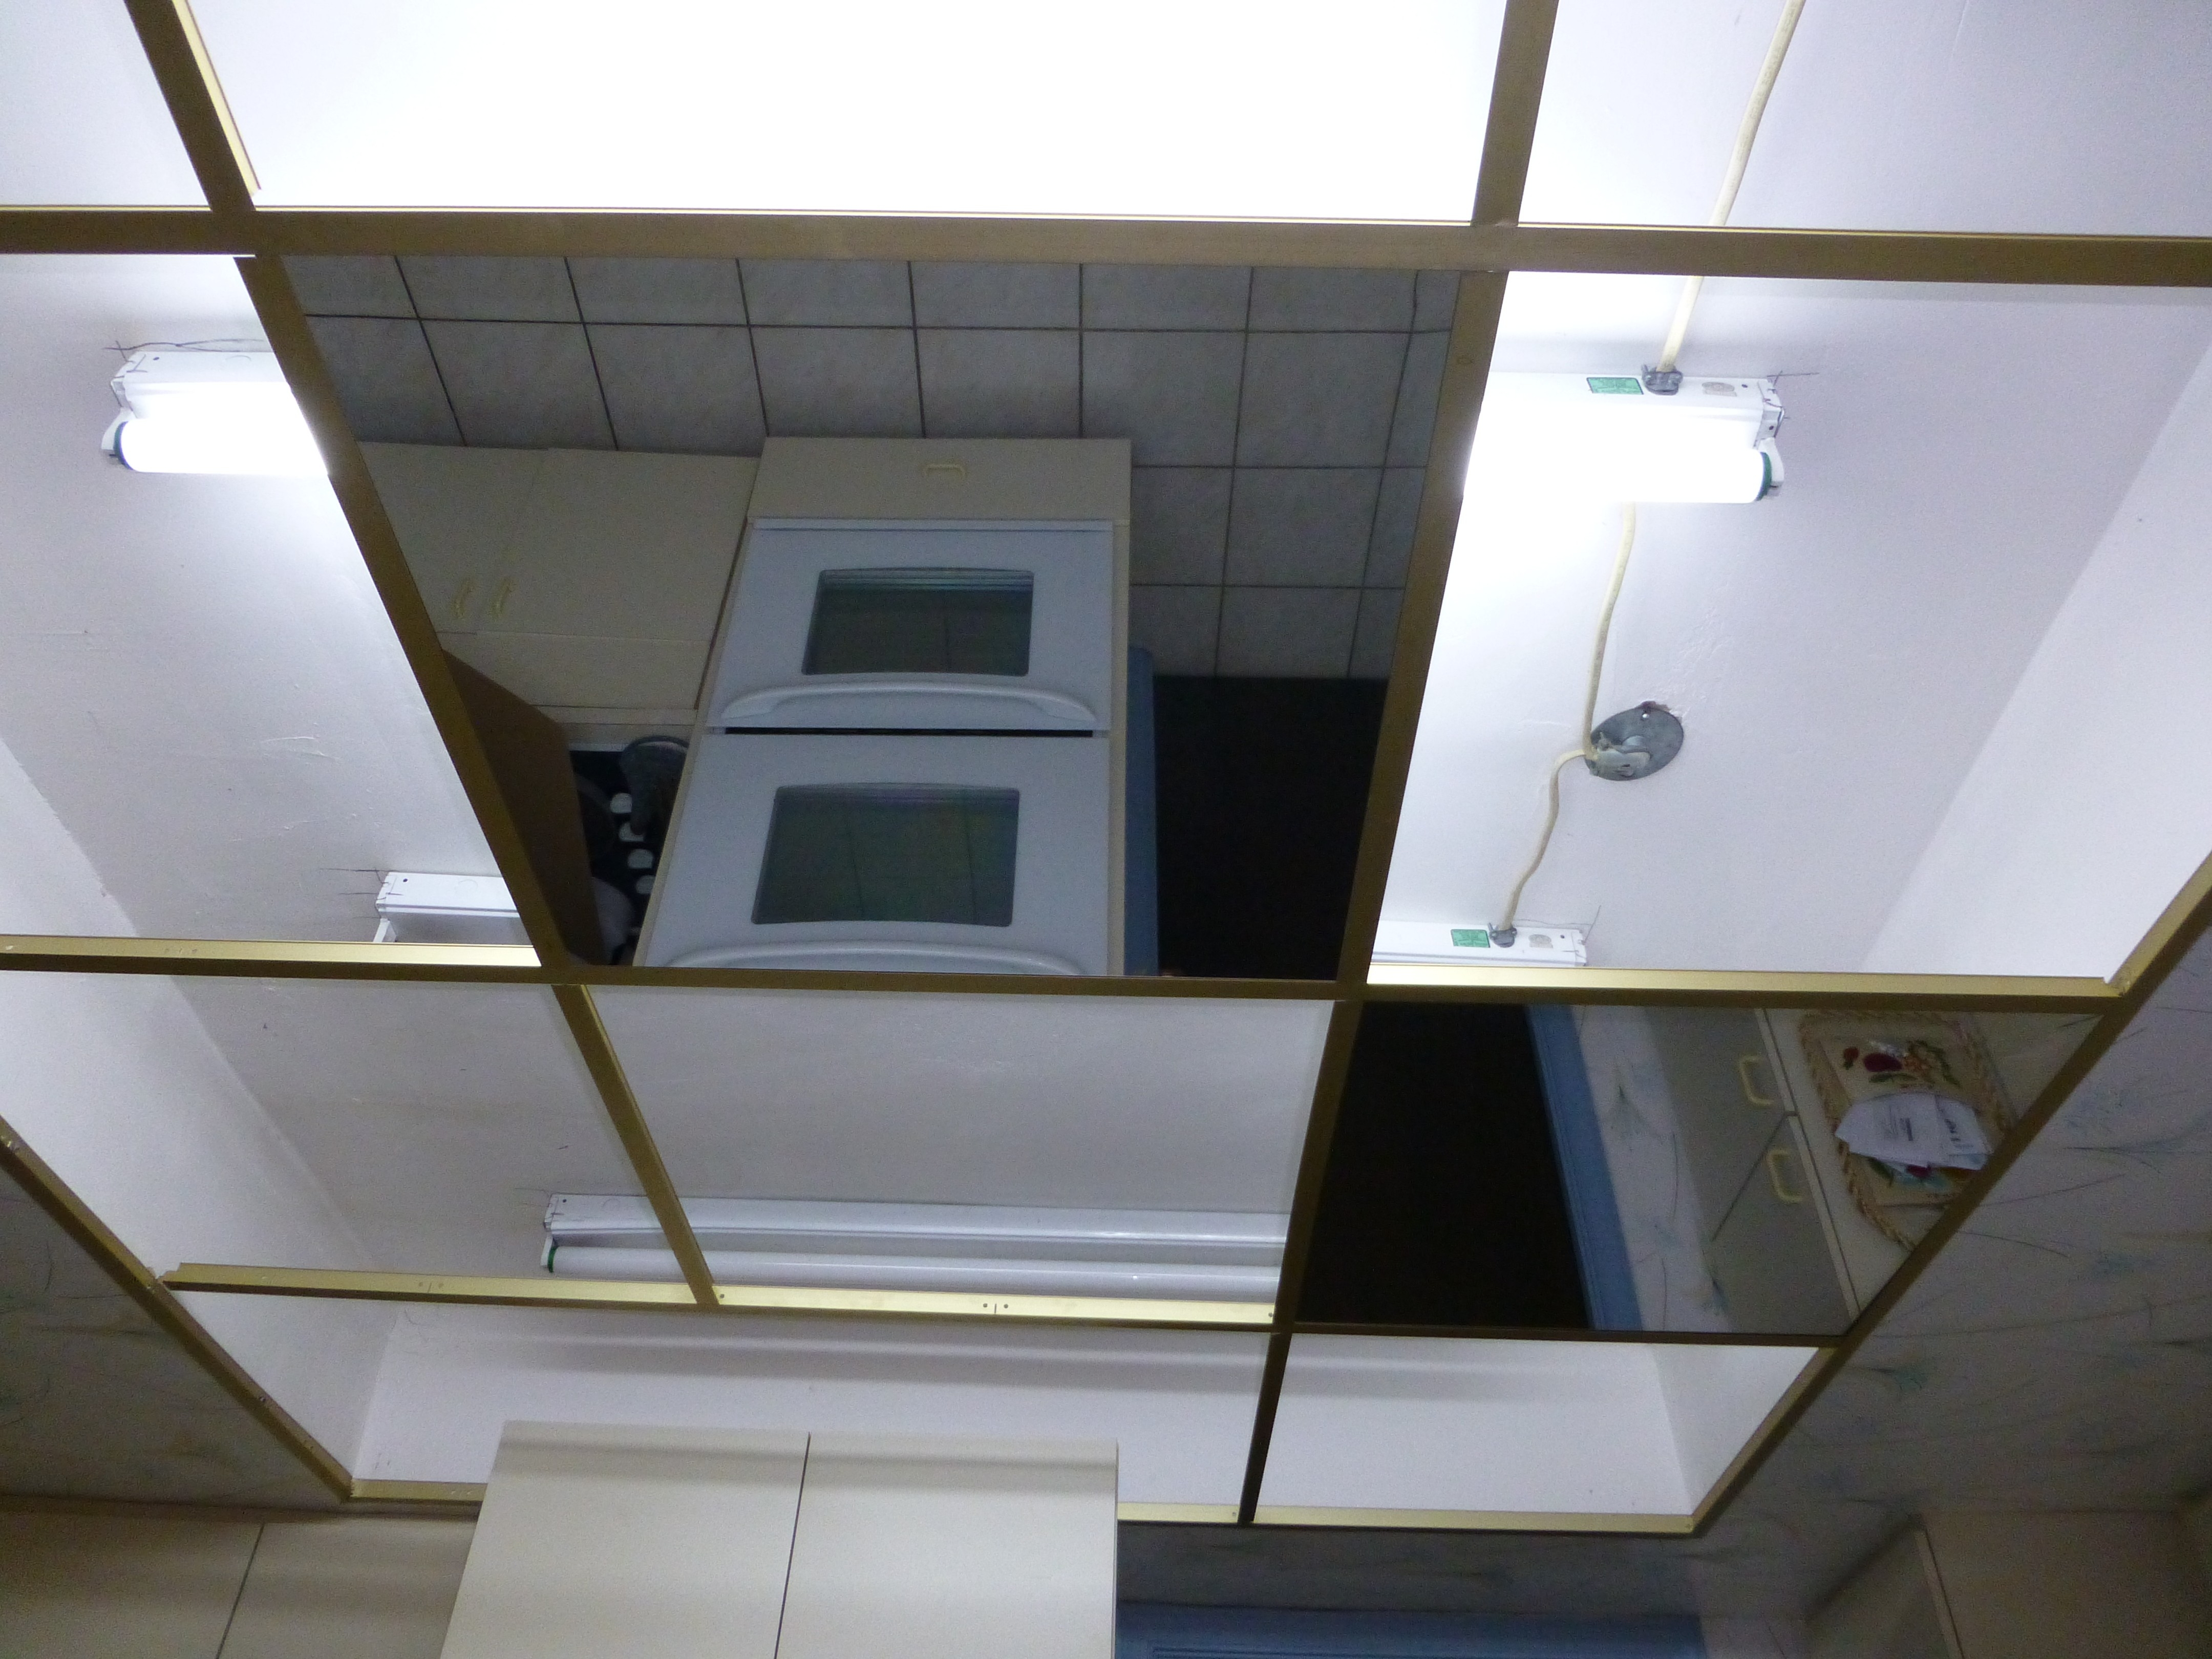 Drop Ceiling Mirror Tilesglass less mirror for grid suspended drop in ceiling tile dance